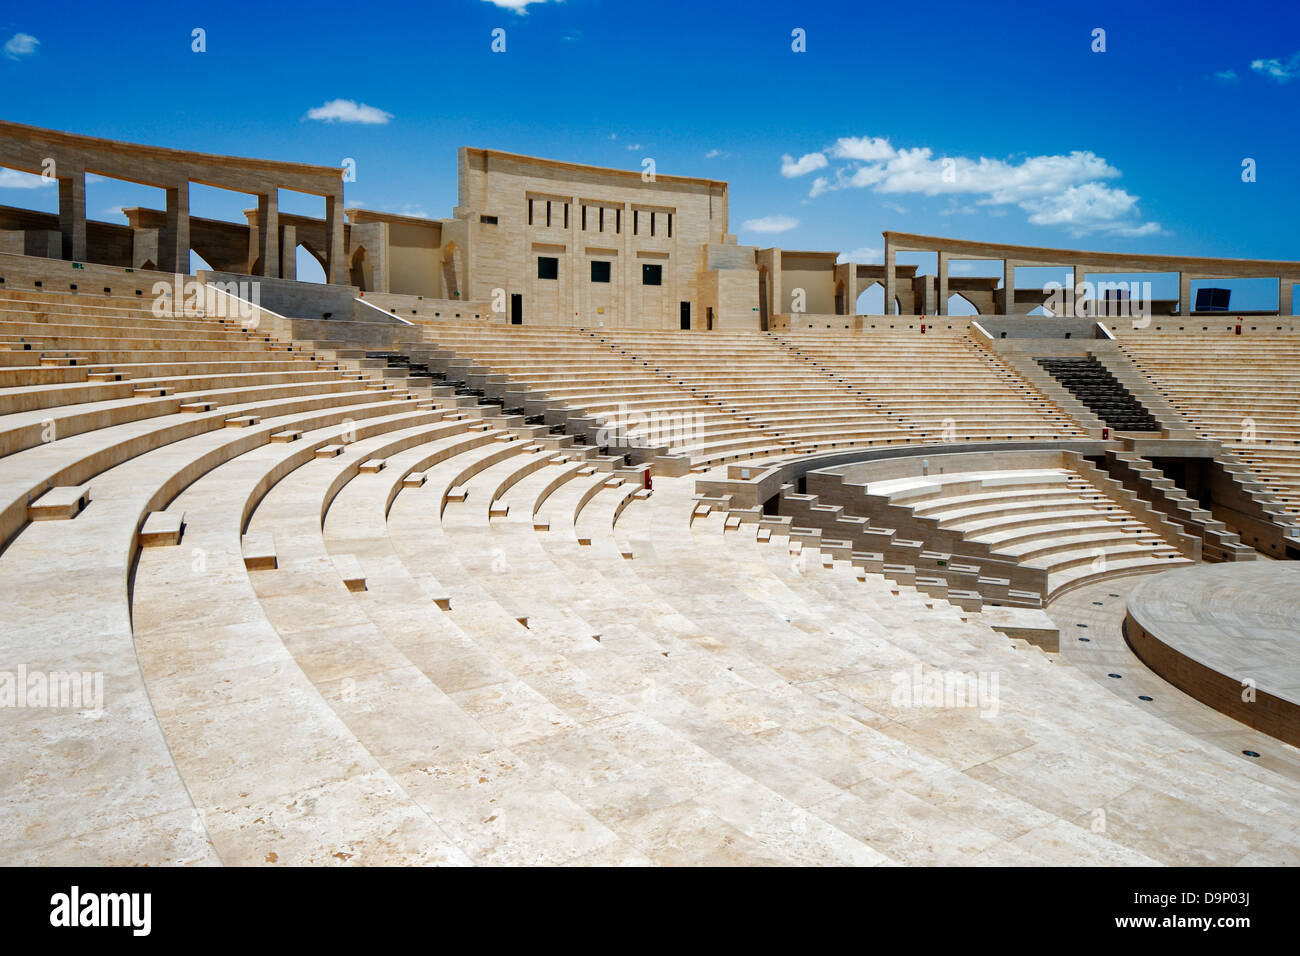 The Katara Amphitheater, Doha is a crafted balance between the classical Greek theater concept and the traditional Islamic featu Stock Photo